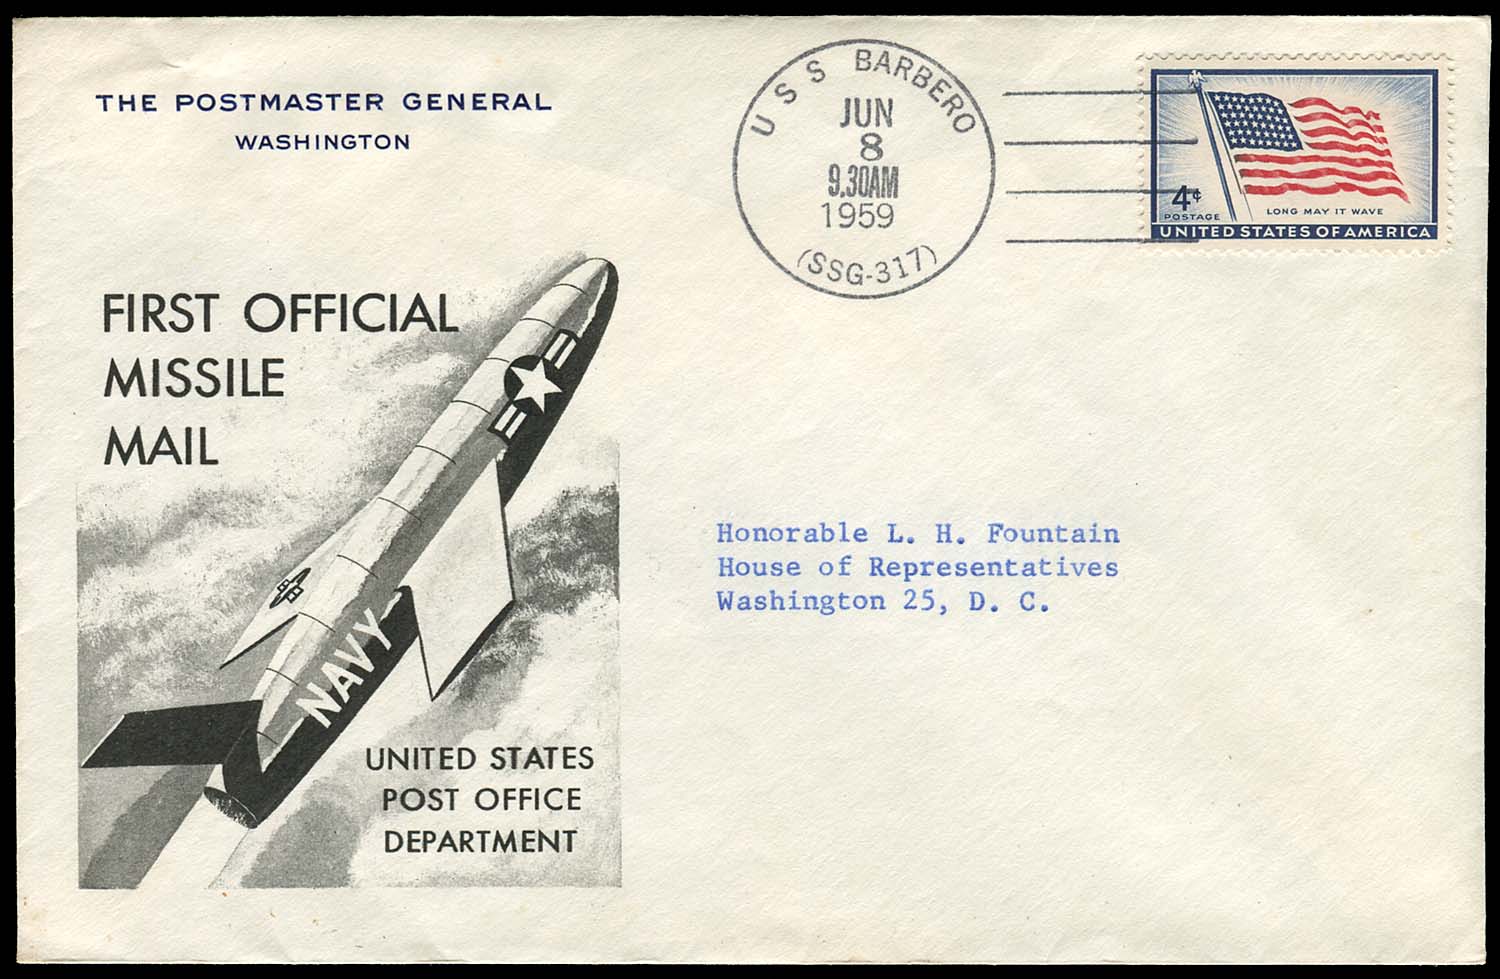 First Official Missile Mail letter